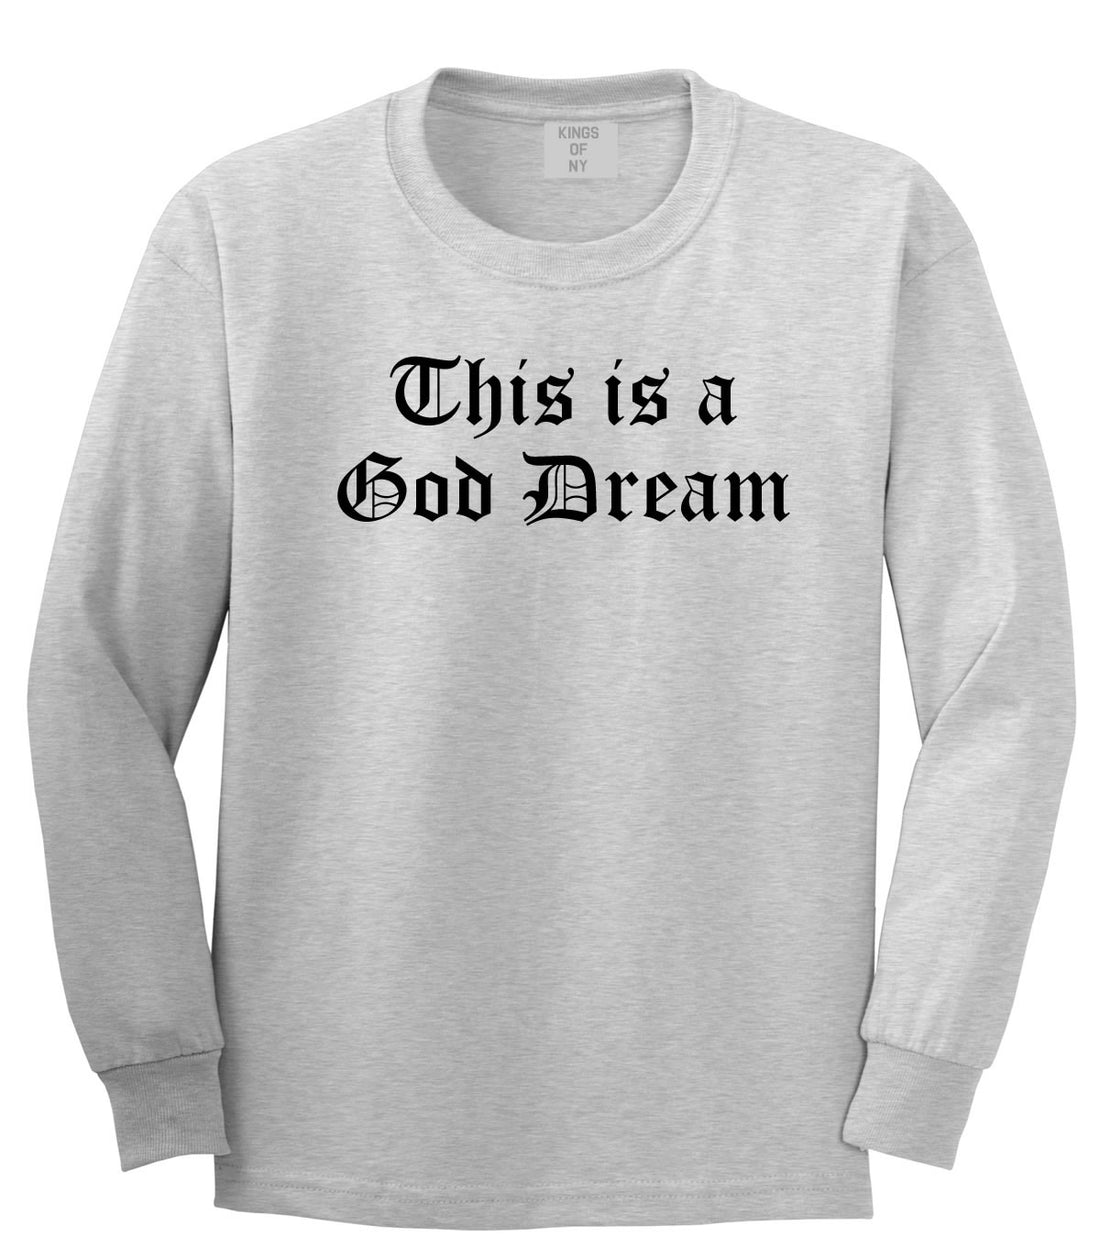 This Is A God Dream Gothic Old English Long Sleeve T-Shirt in Grey By Kings Of NY